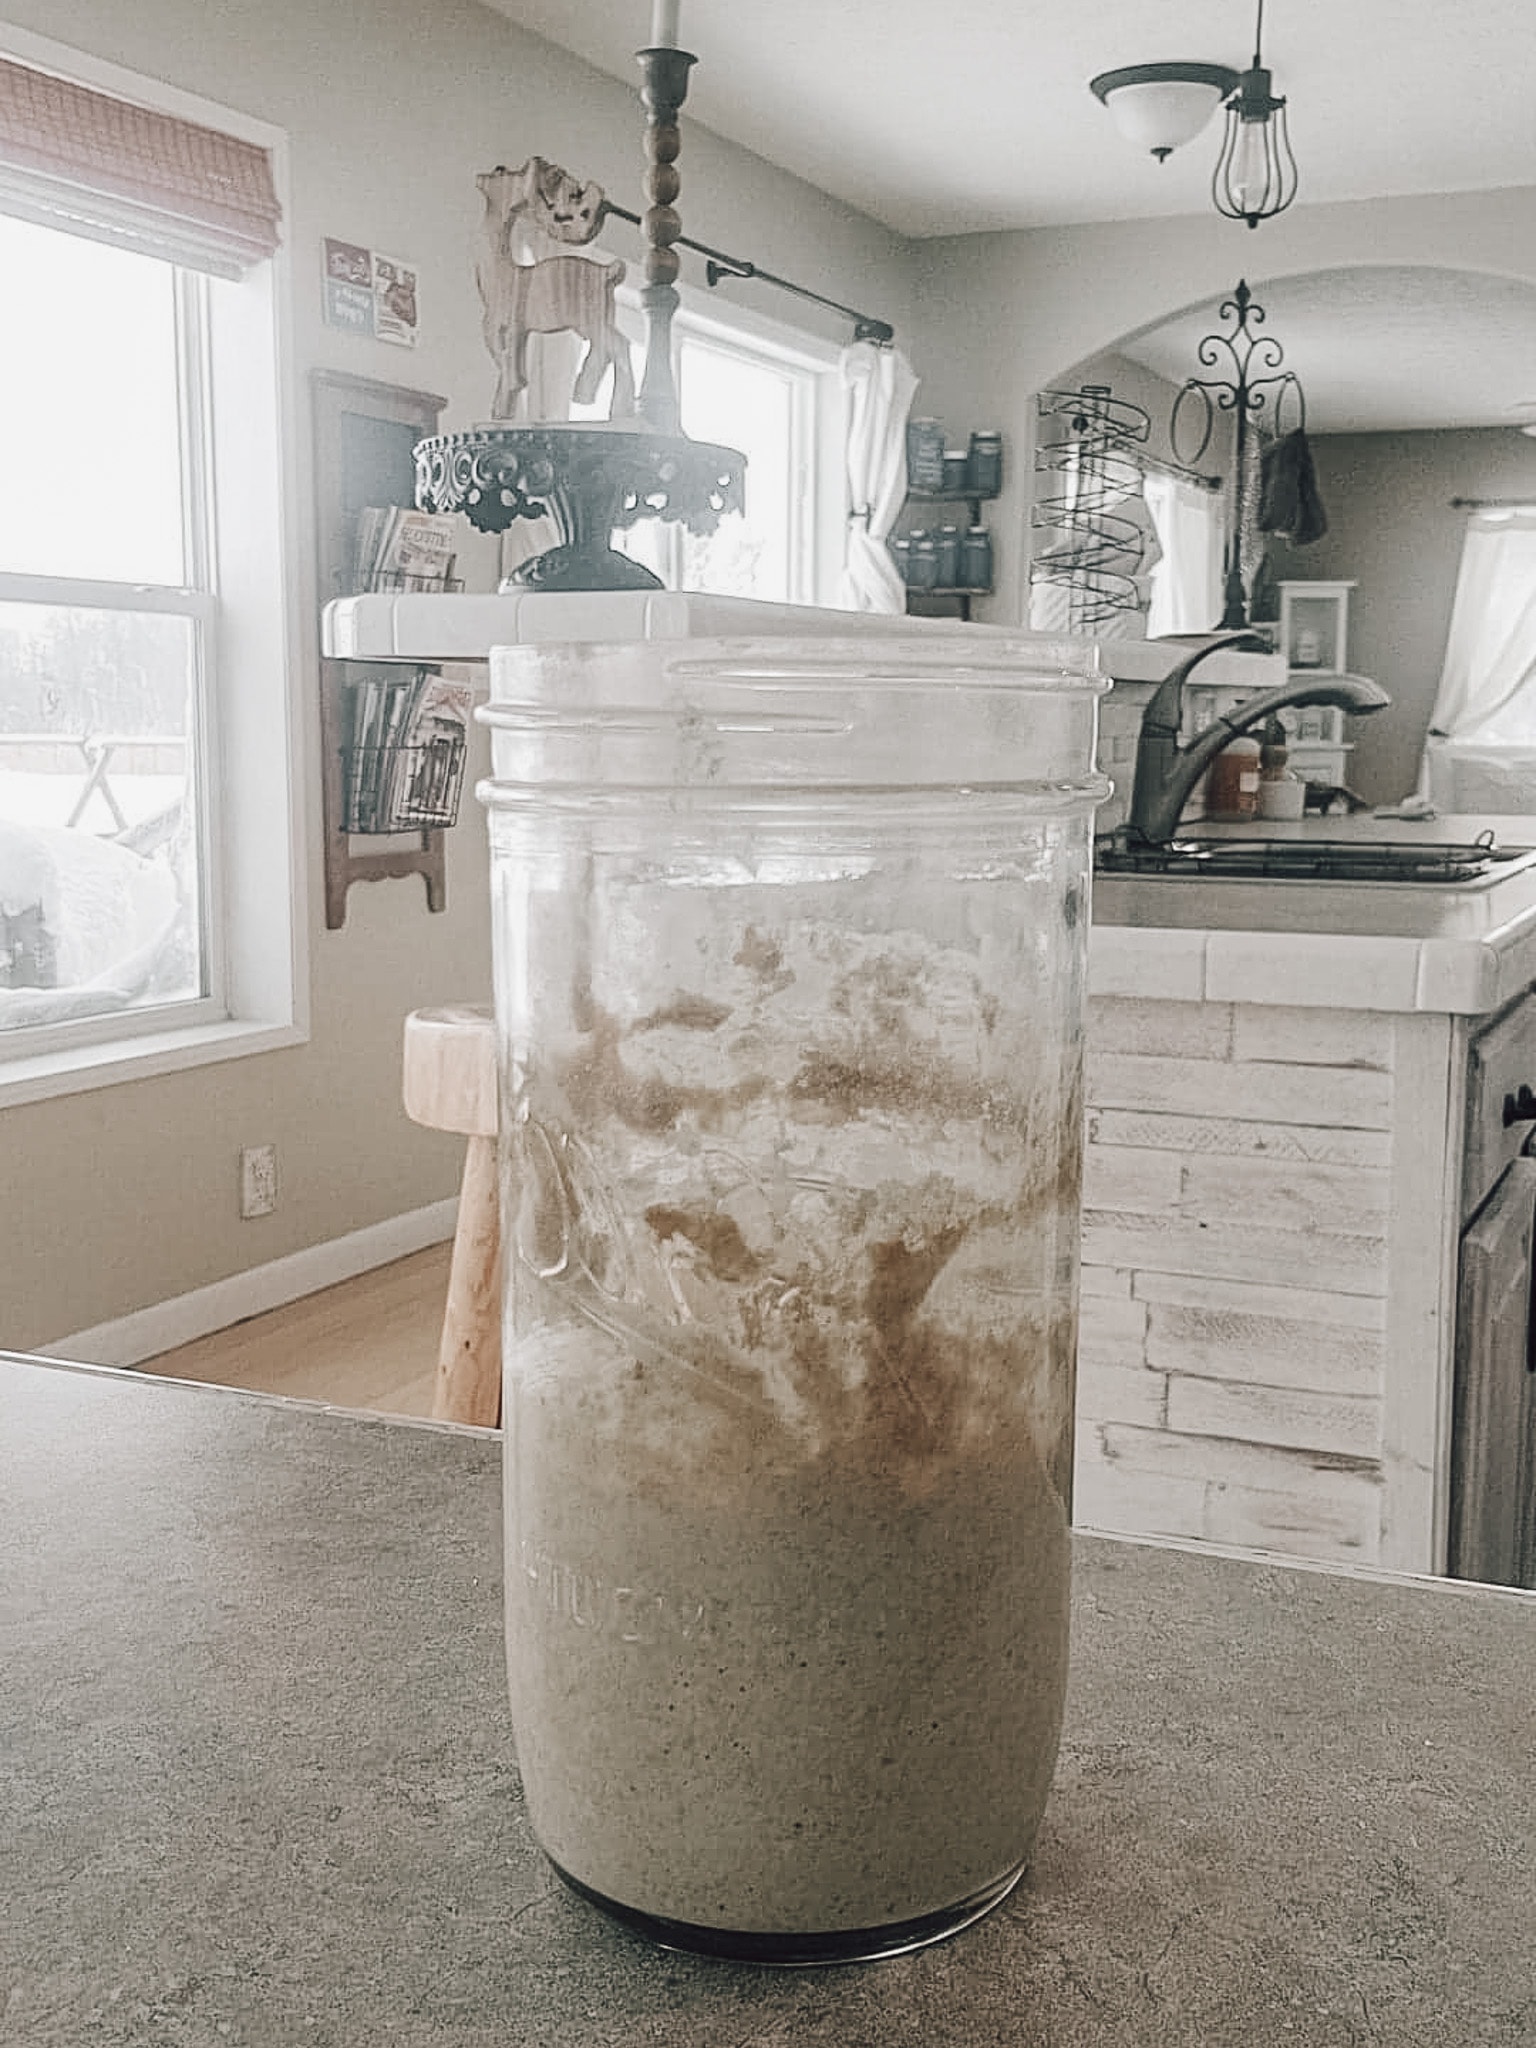 Day 3 - Discard ½ of the sourdough starter. Add ¼ cup filtered water and ½ cup einkorn flour. If you are using whole wheat einkorn, evaluate if the mixture is too thick and start reducing your flour by 1 tbsp. 